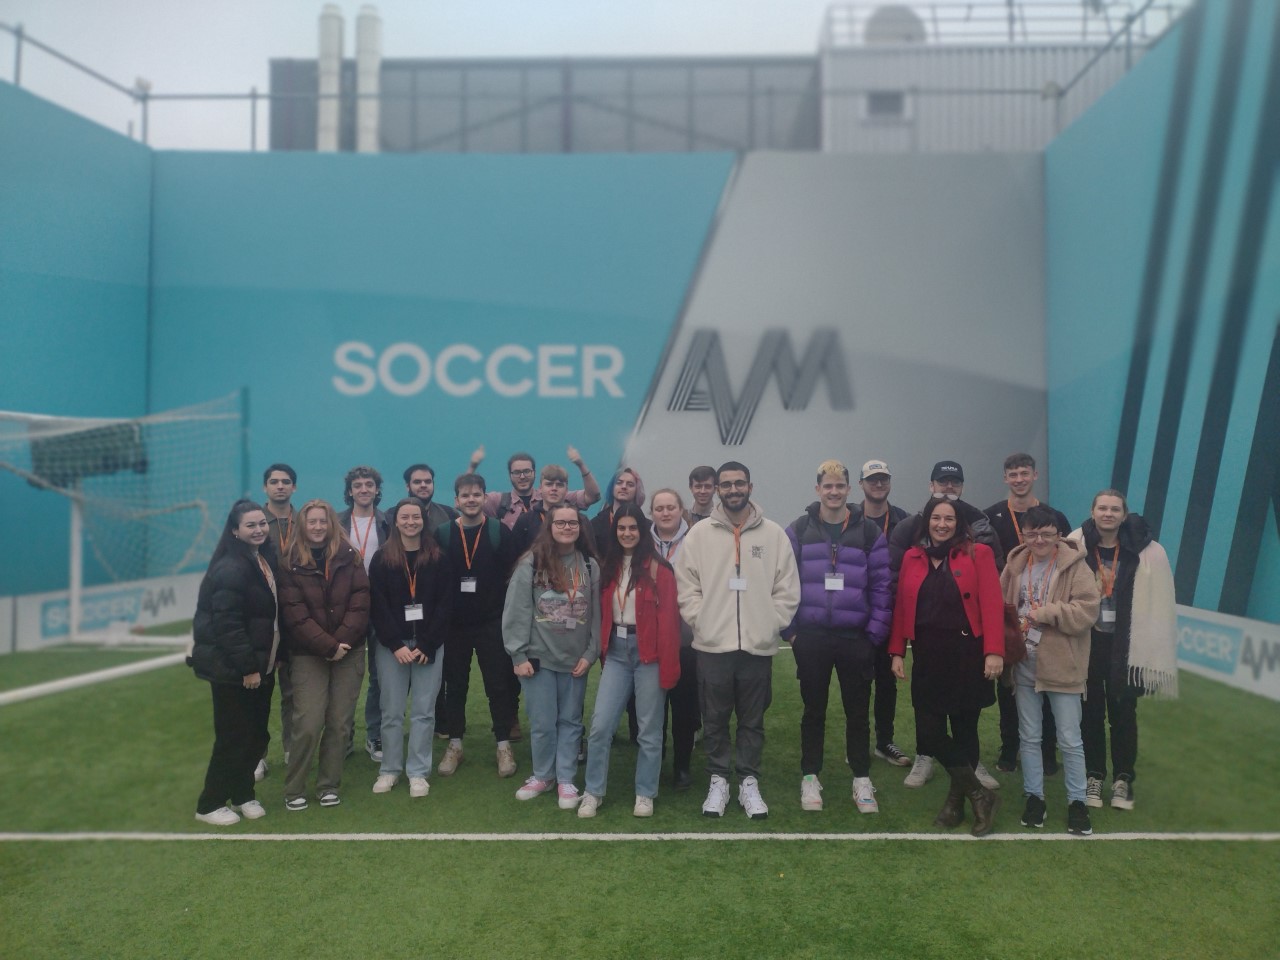 Solent TV production and post-production students in the Soccer AM outdoor studio of Sky Studios, London.